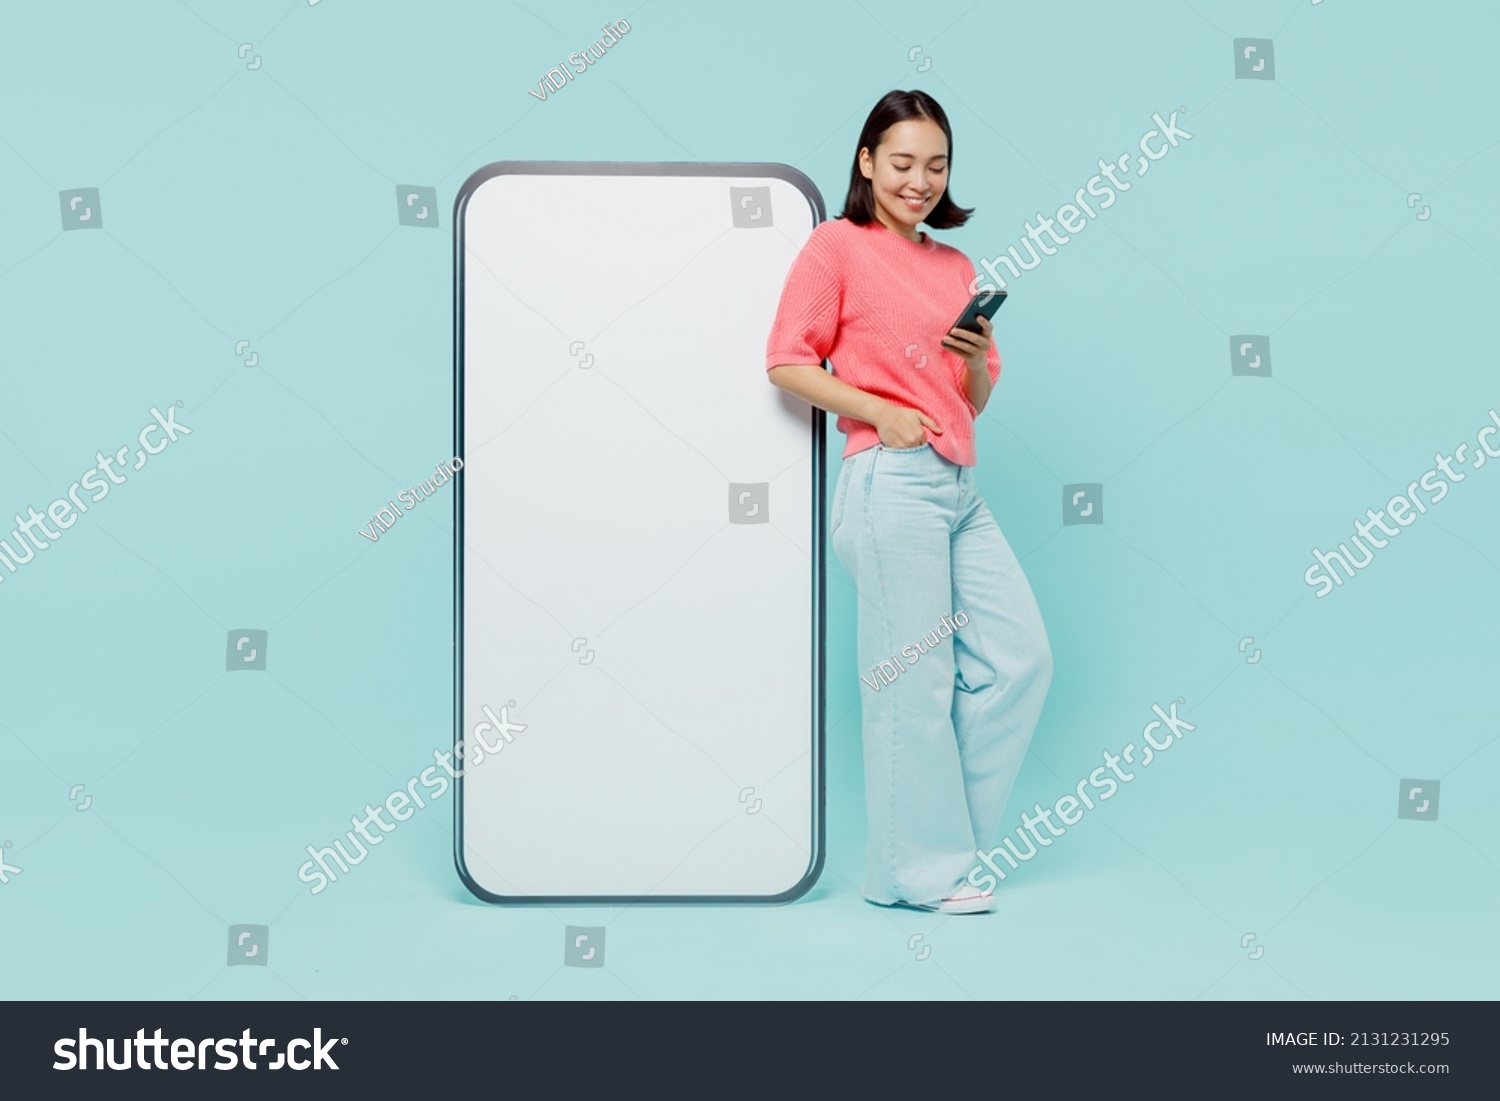 Full body young smiling happy woman of Asian ethnicity 20s in pink sweater stand near big mobile cell phone with blank screen workspace area chatting isolated on pastel plain light blue background. #2131231295